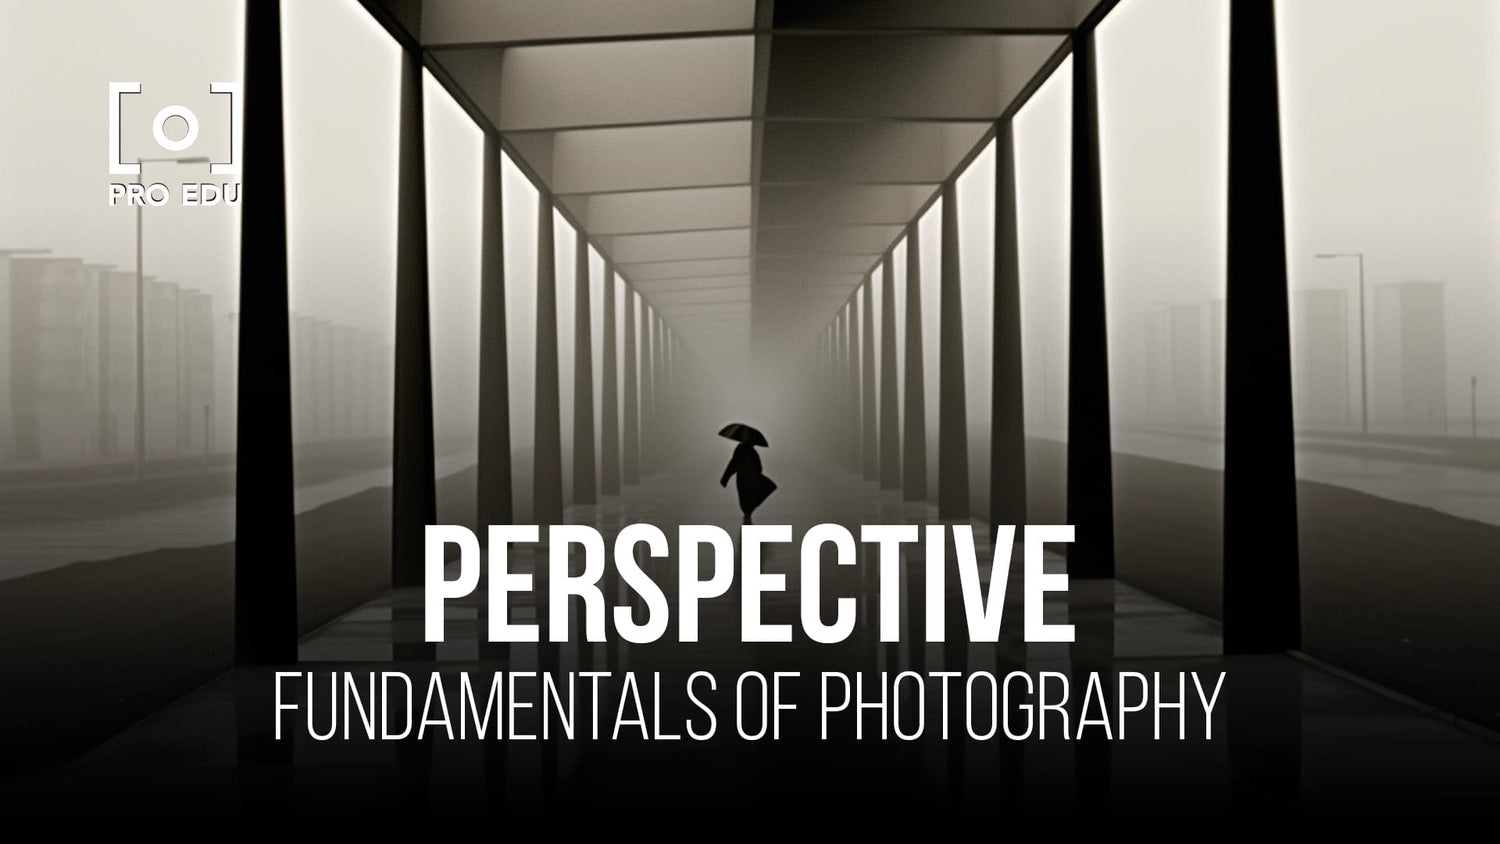 Shaping the viewer's perception with perspective techniques in photography